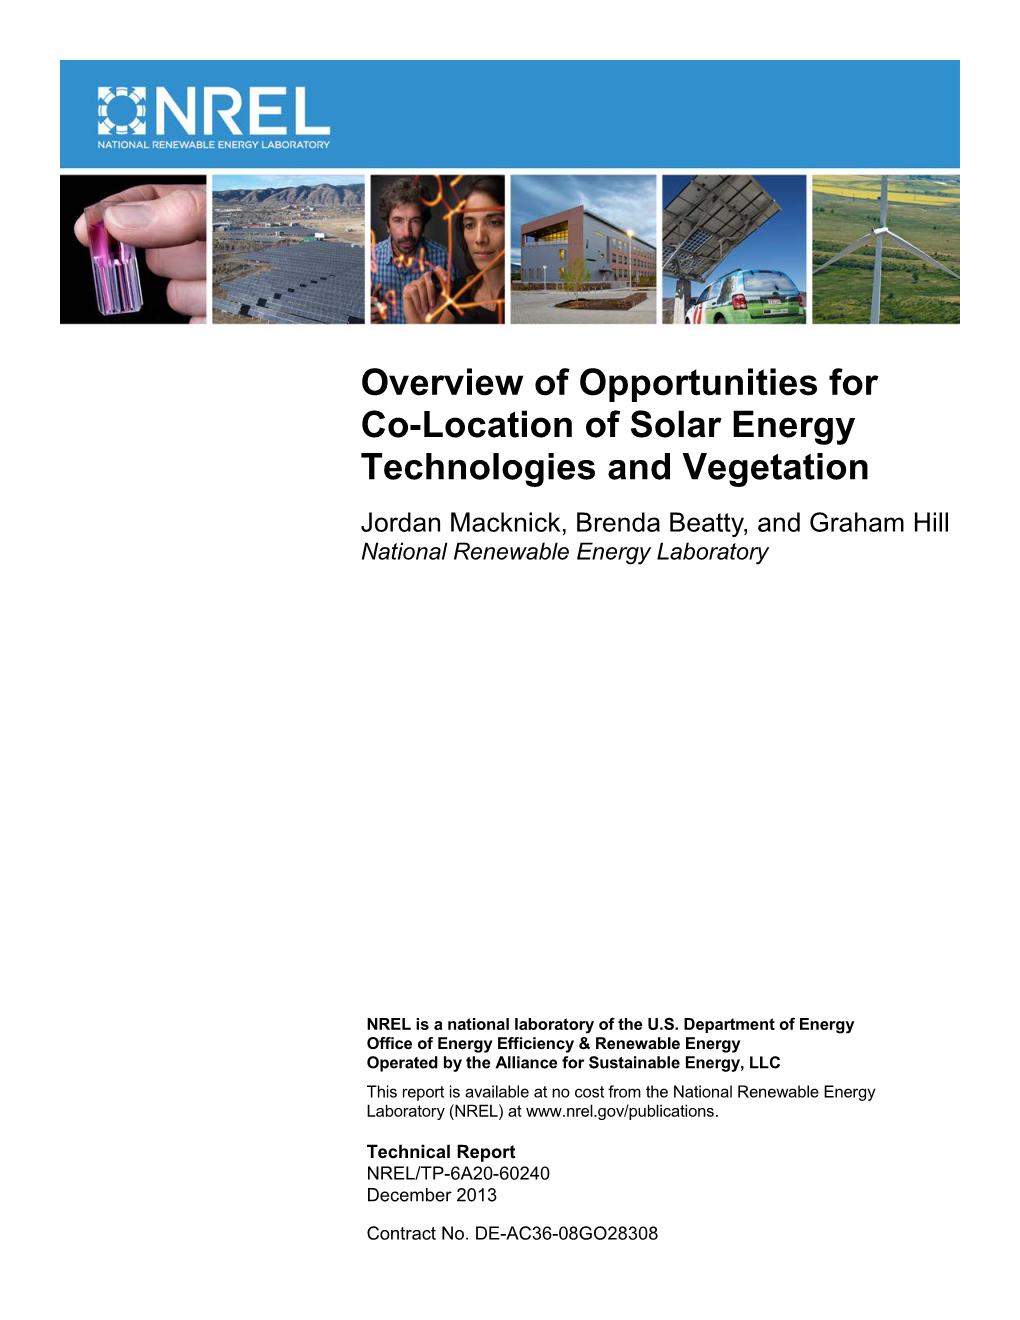 Overview of Opportunities for Co-Location of Solar Energy